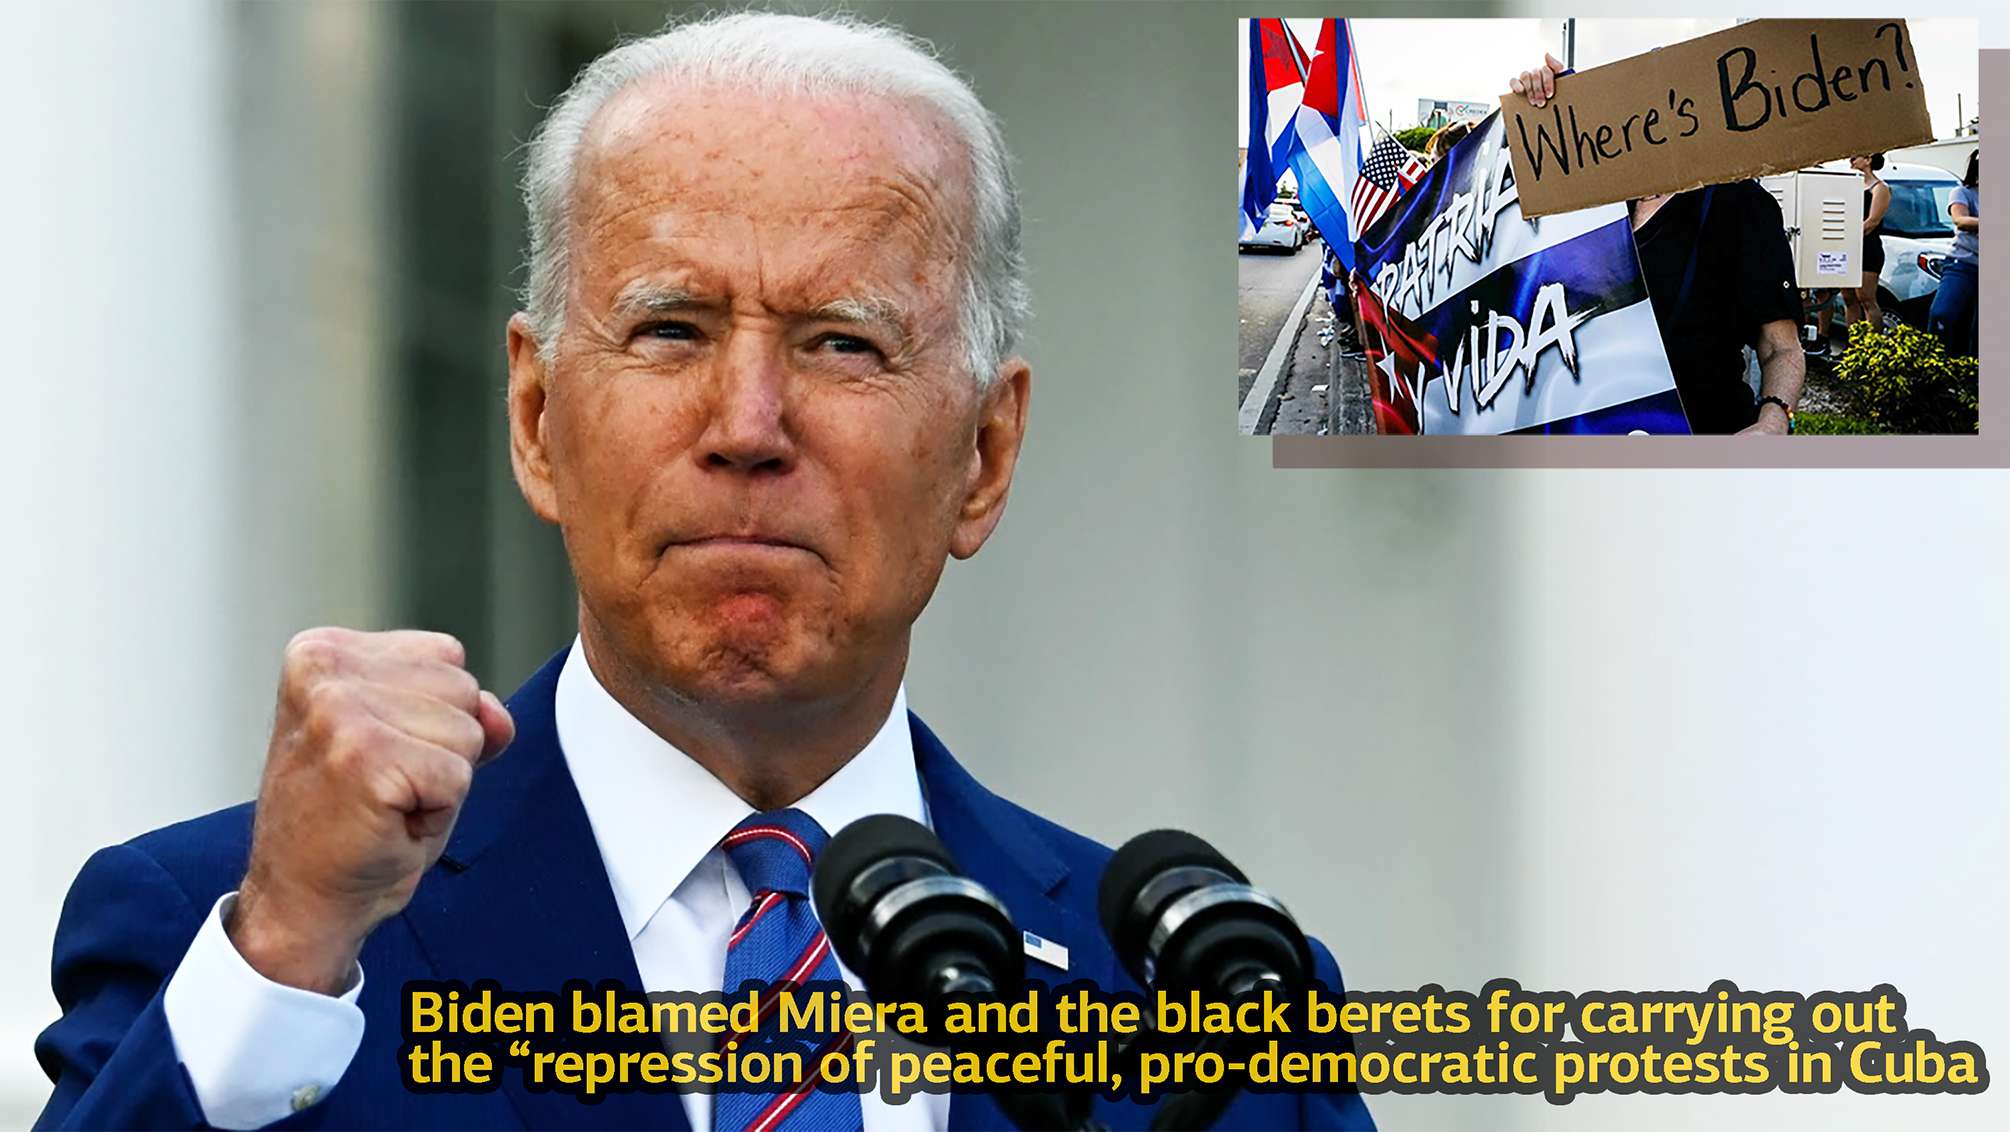 Biden blamed Miera and the black berets for carrying out the repression of peaceful pro democratic protests in Cuba